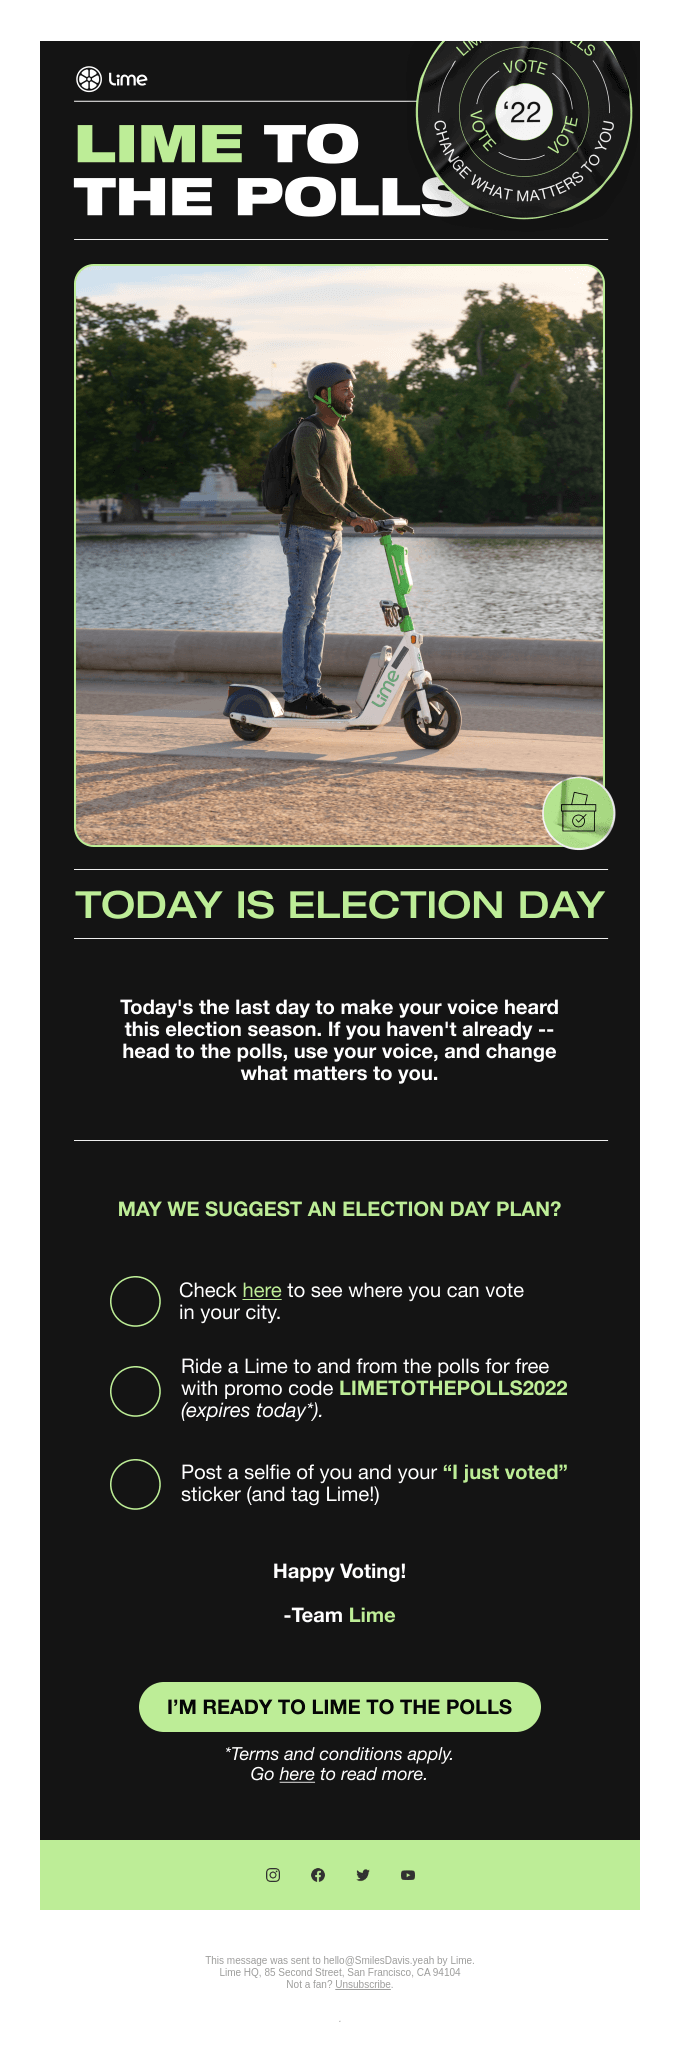 Election Day is here!